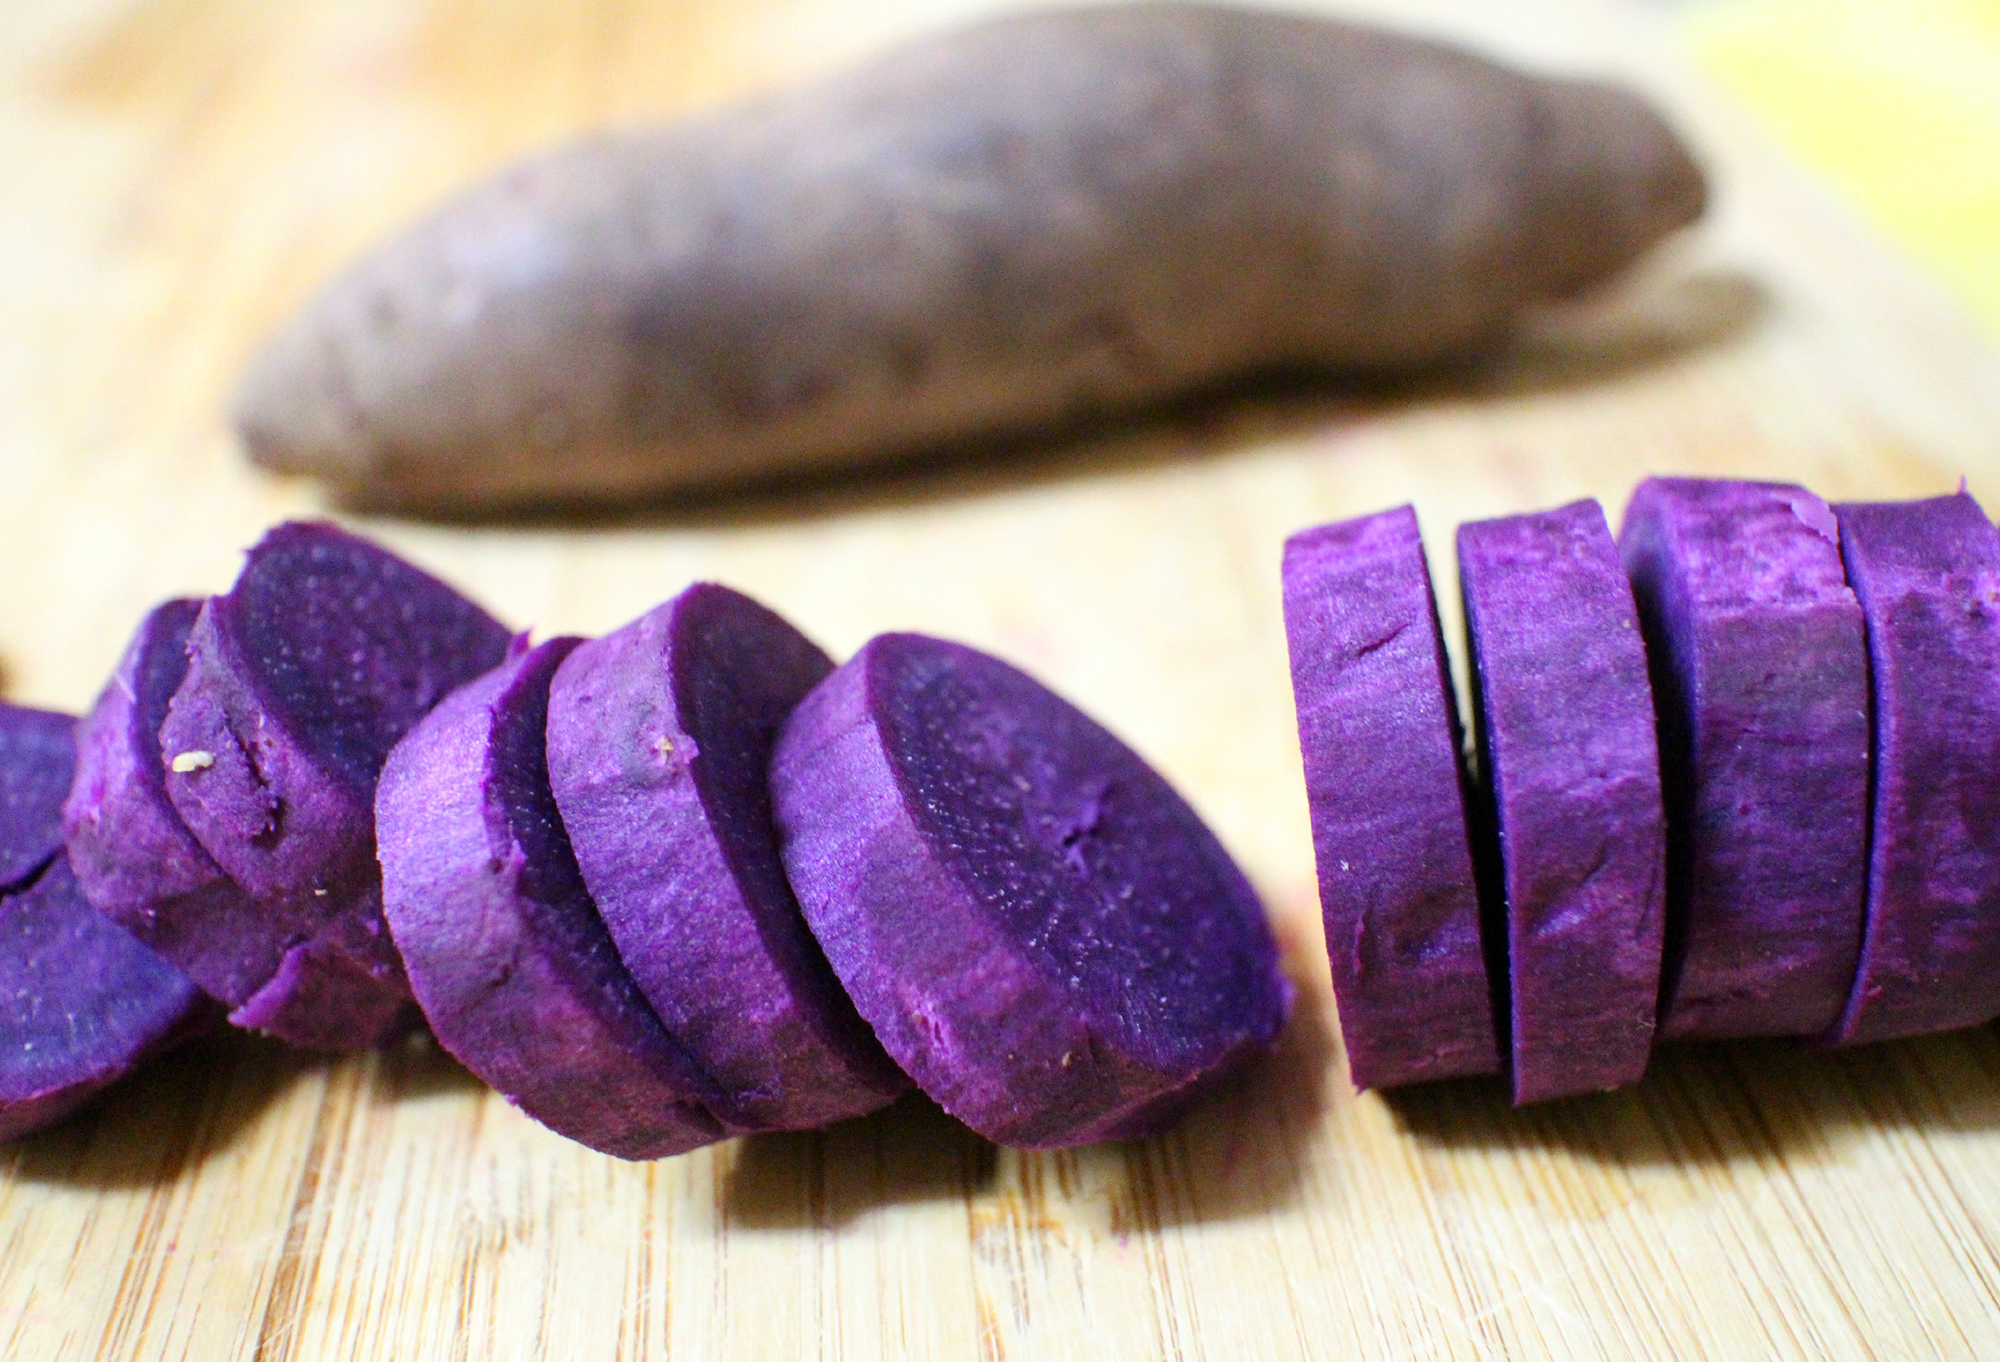 Ube or purple potato is used in many dishes in the Philippines, we make ice cream out of it at Atmosphere Resort